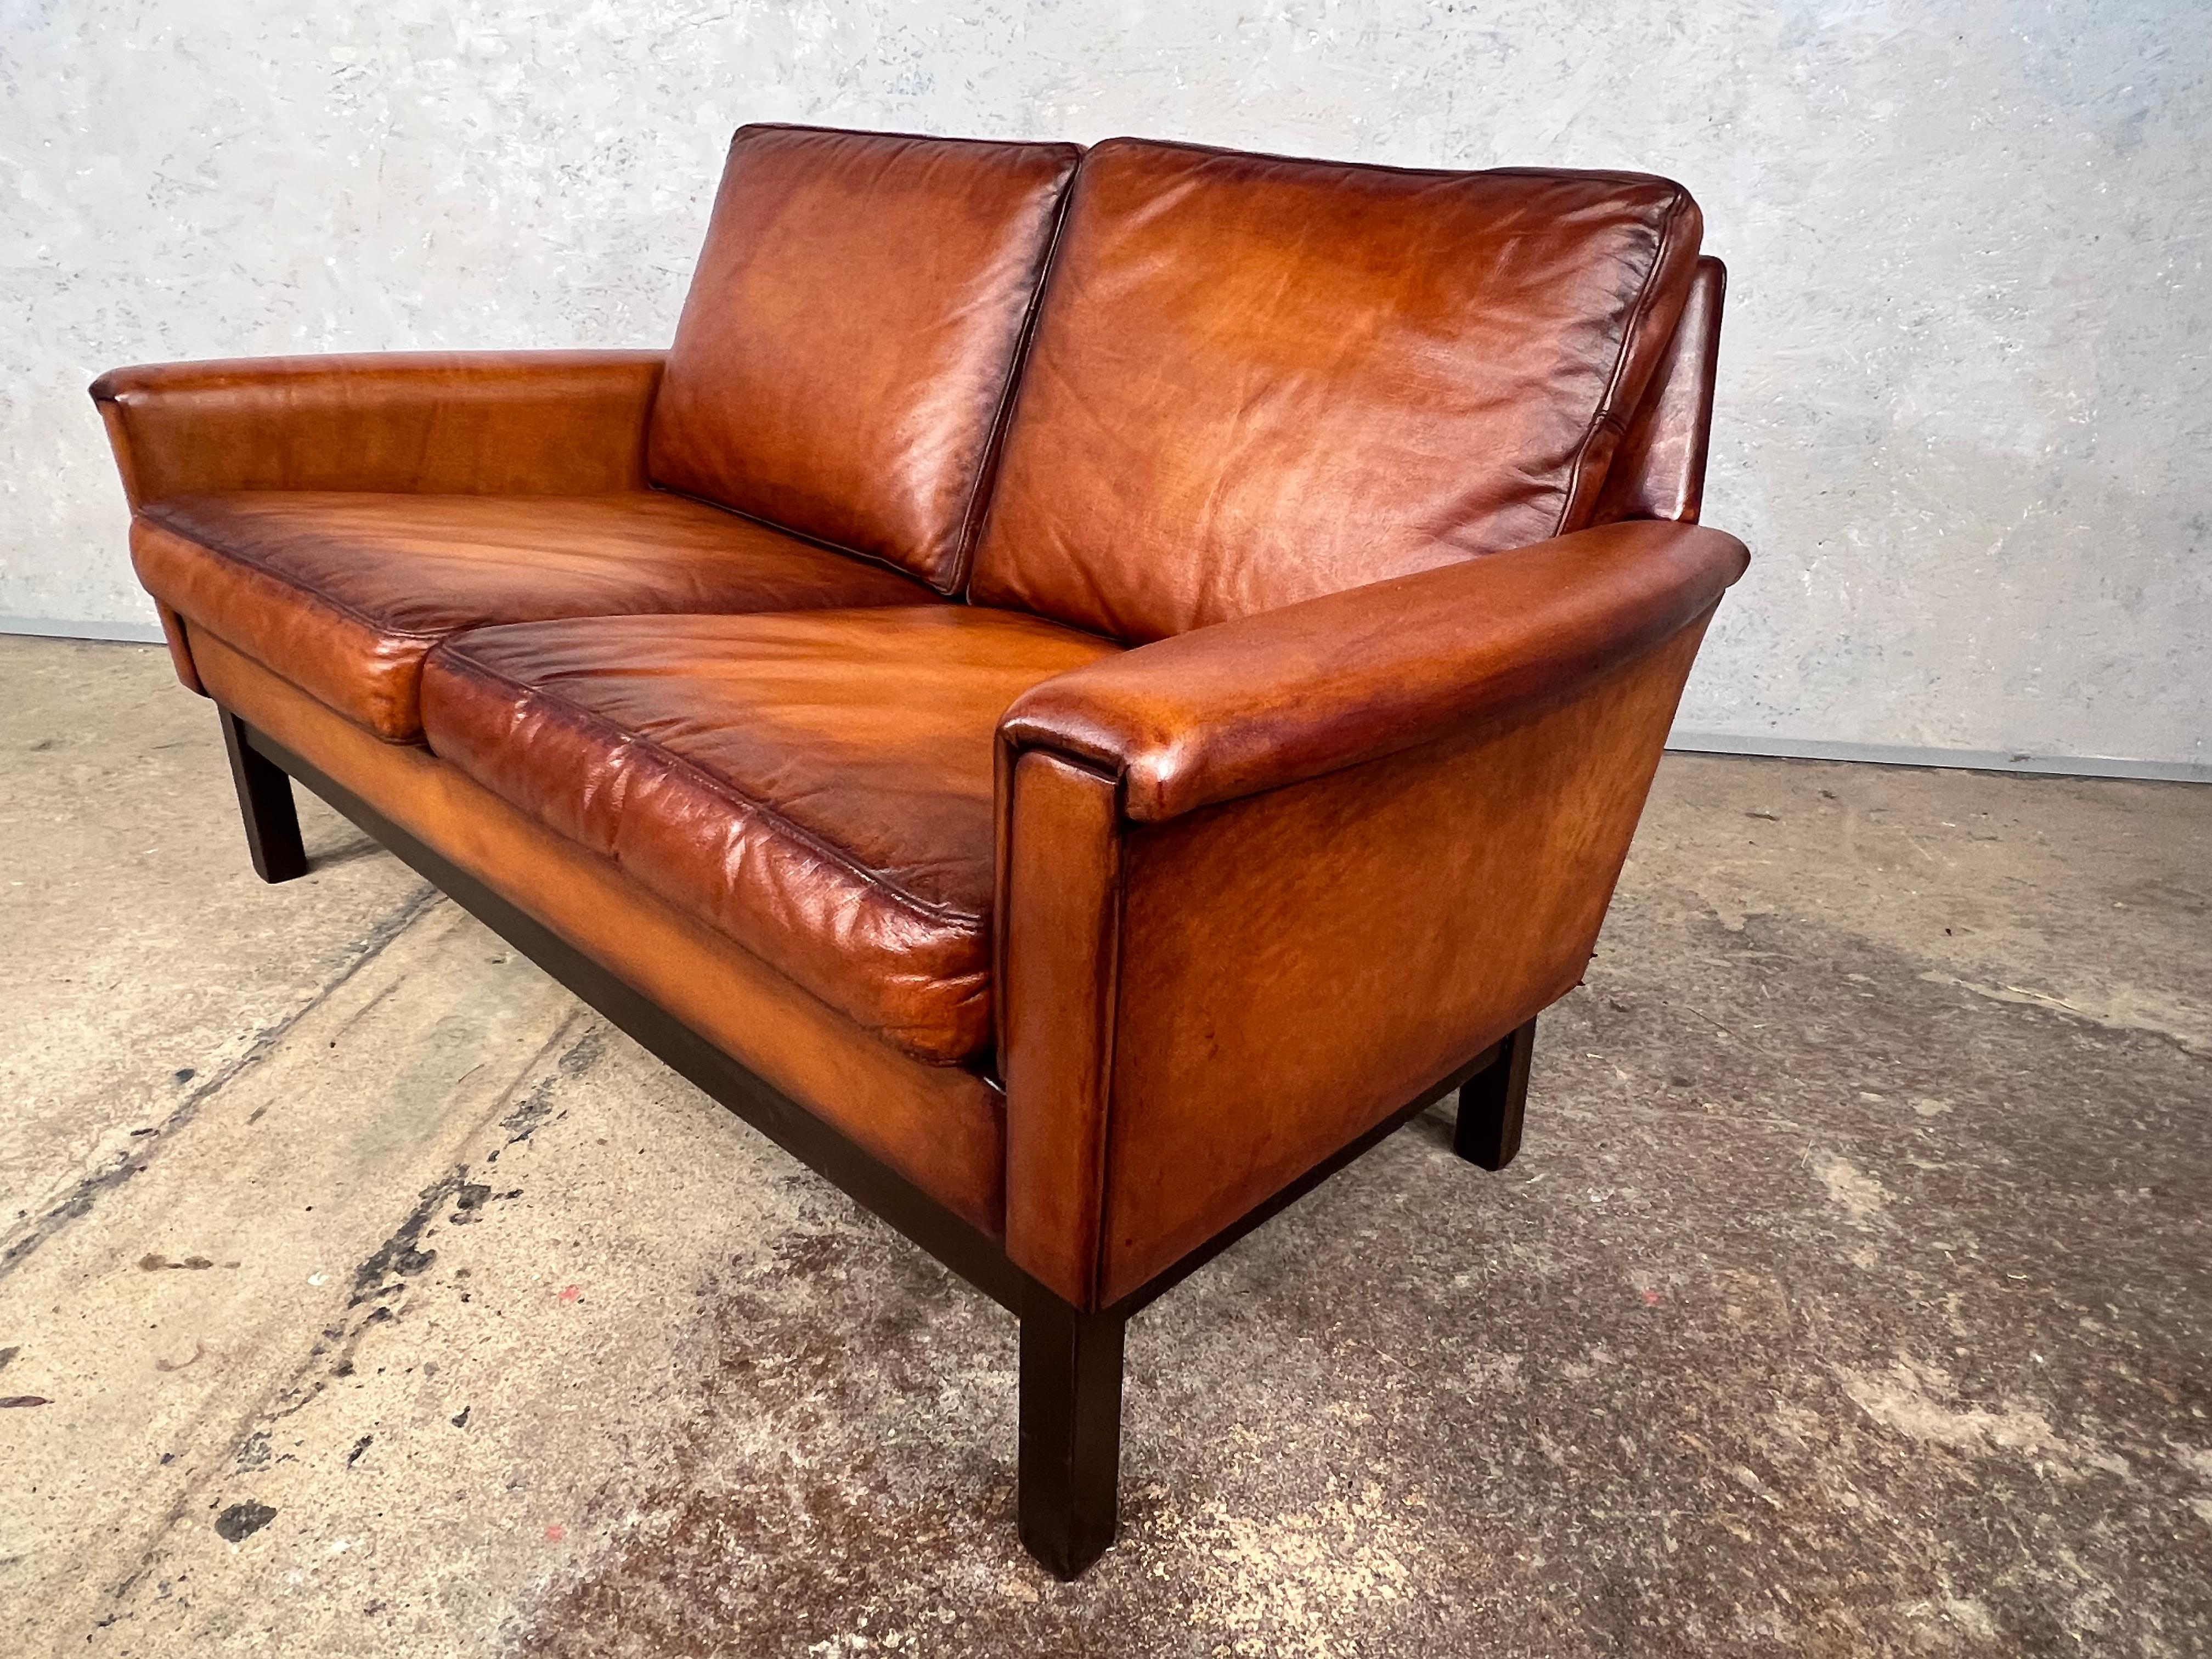 Vintage Danish 70s Mid-Century Light Tan Two Seater Leather Sofa #547 For Sale 1